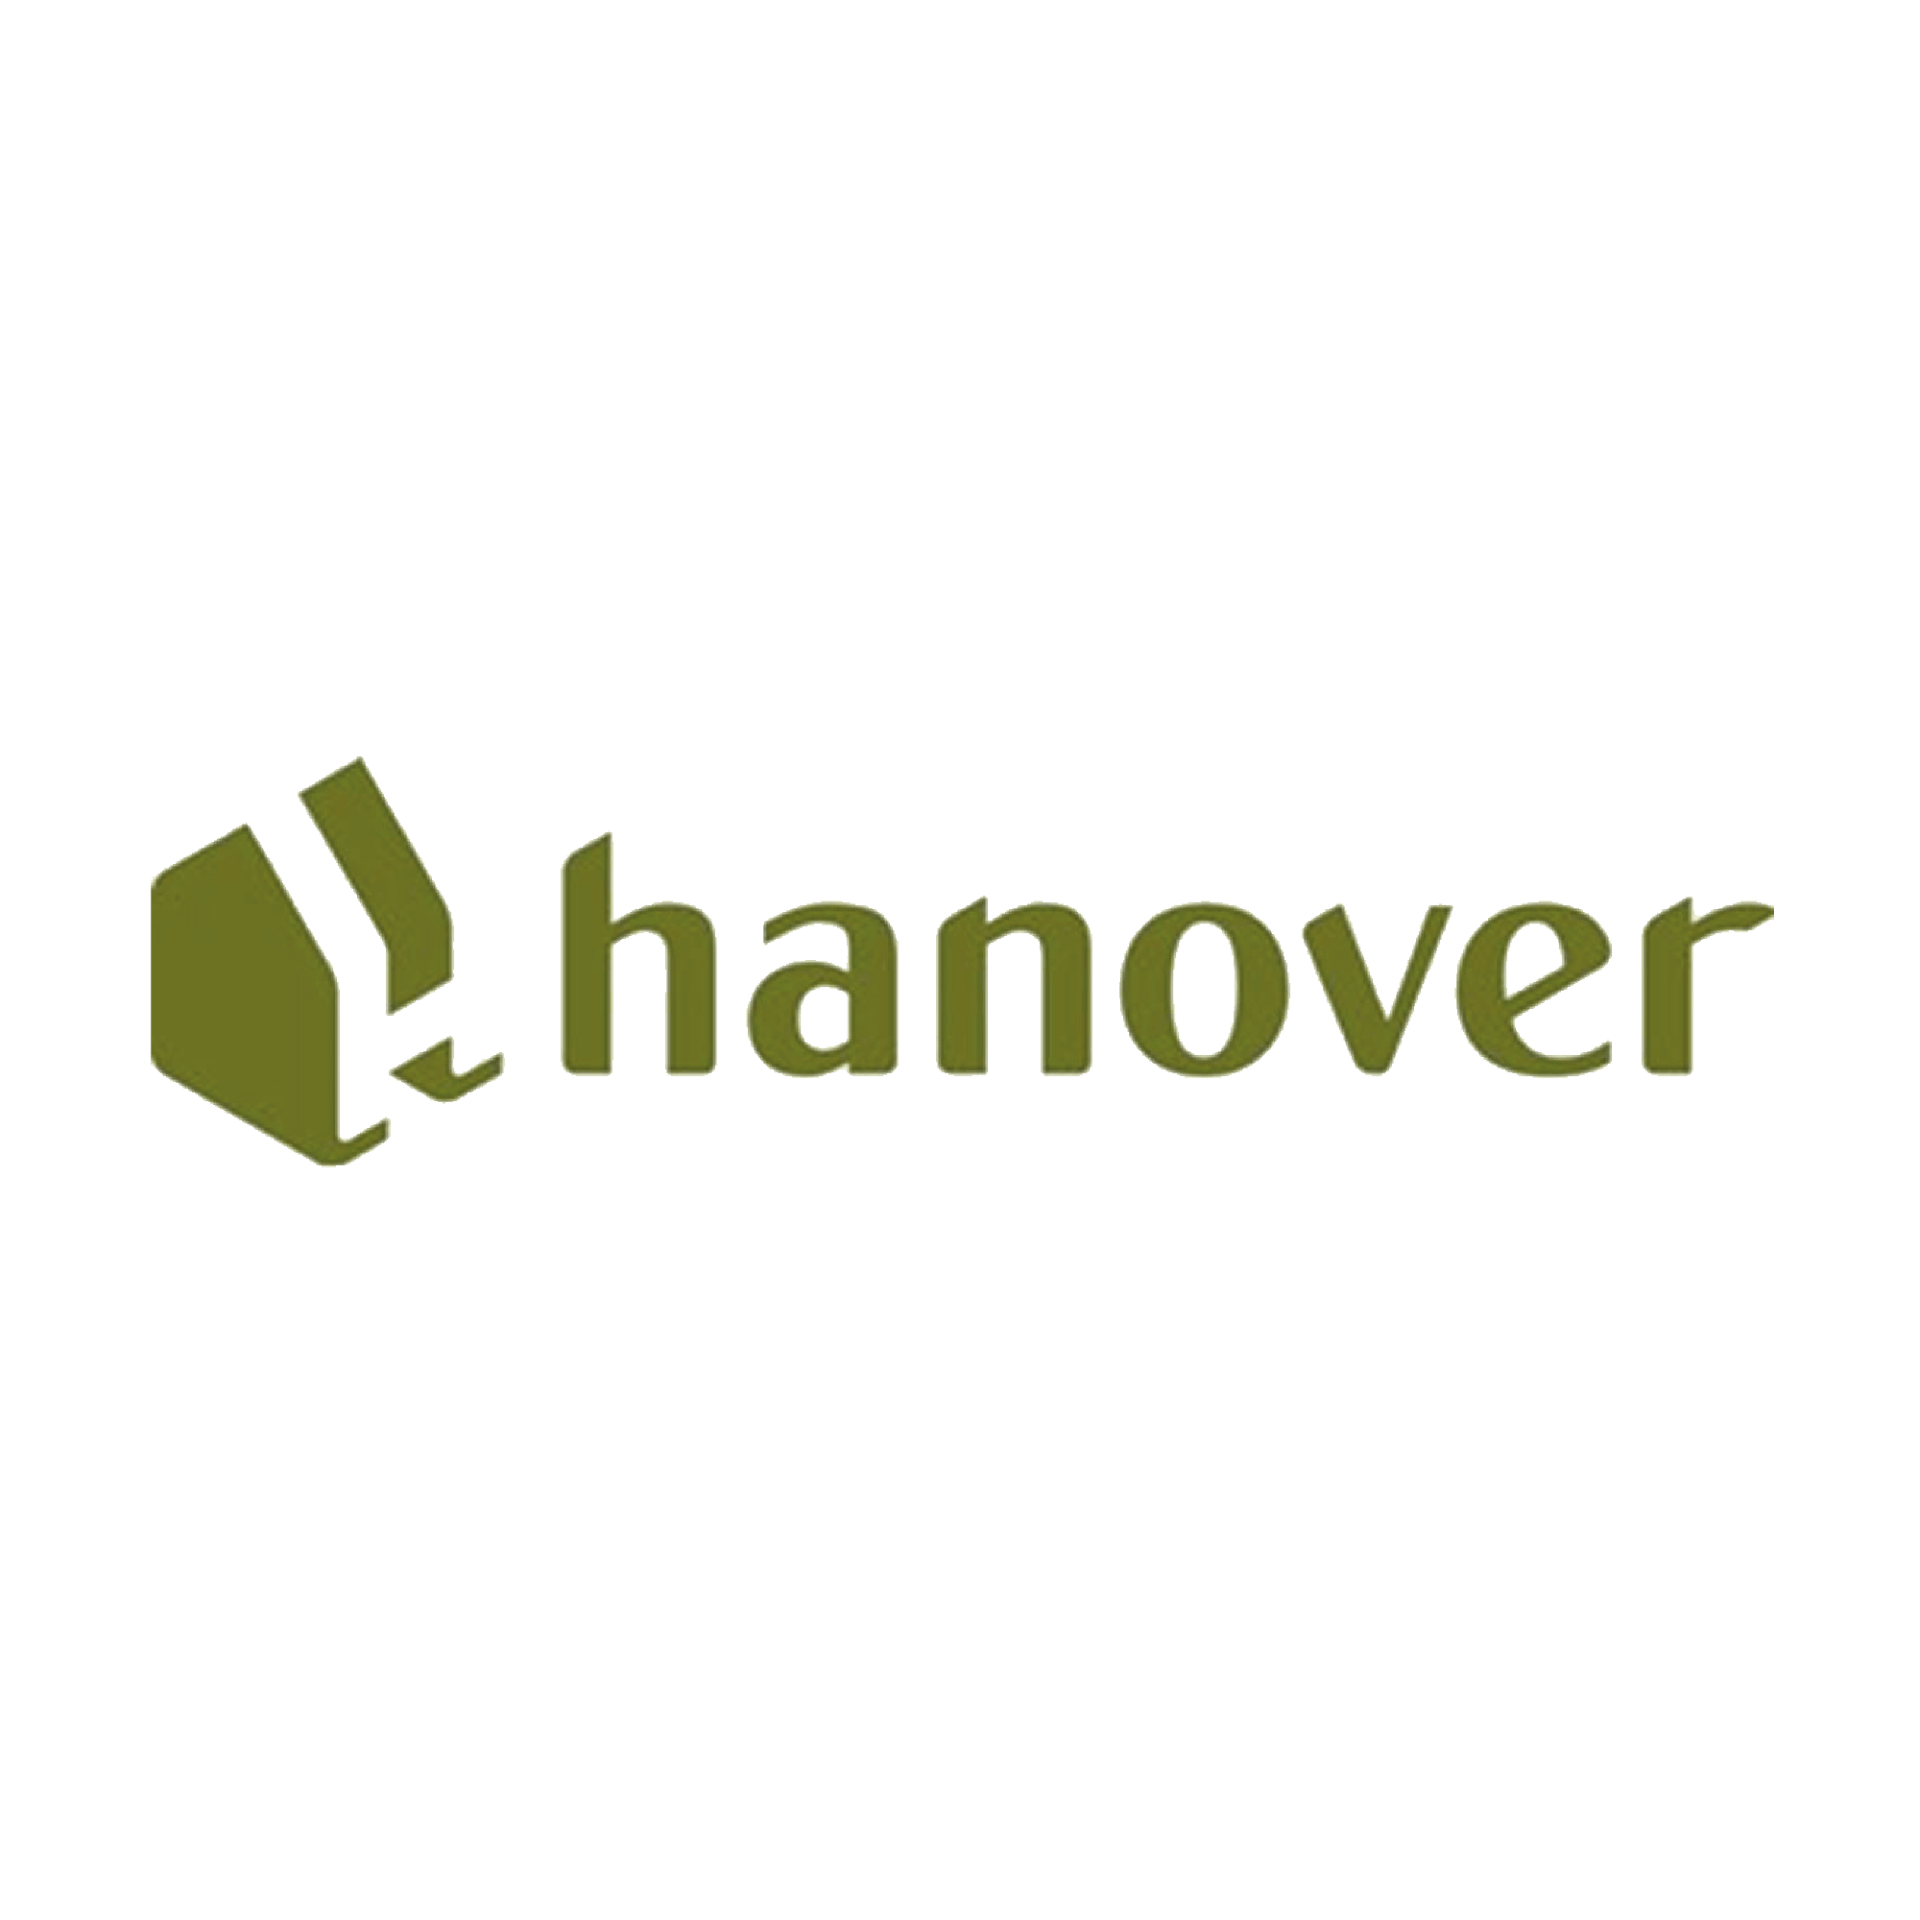 Hanover House - ted Learning client